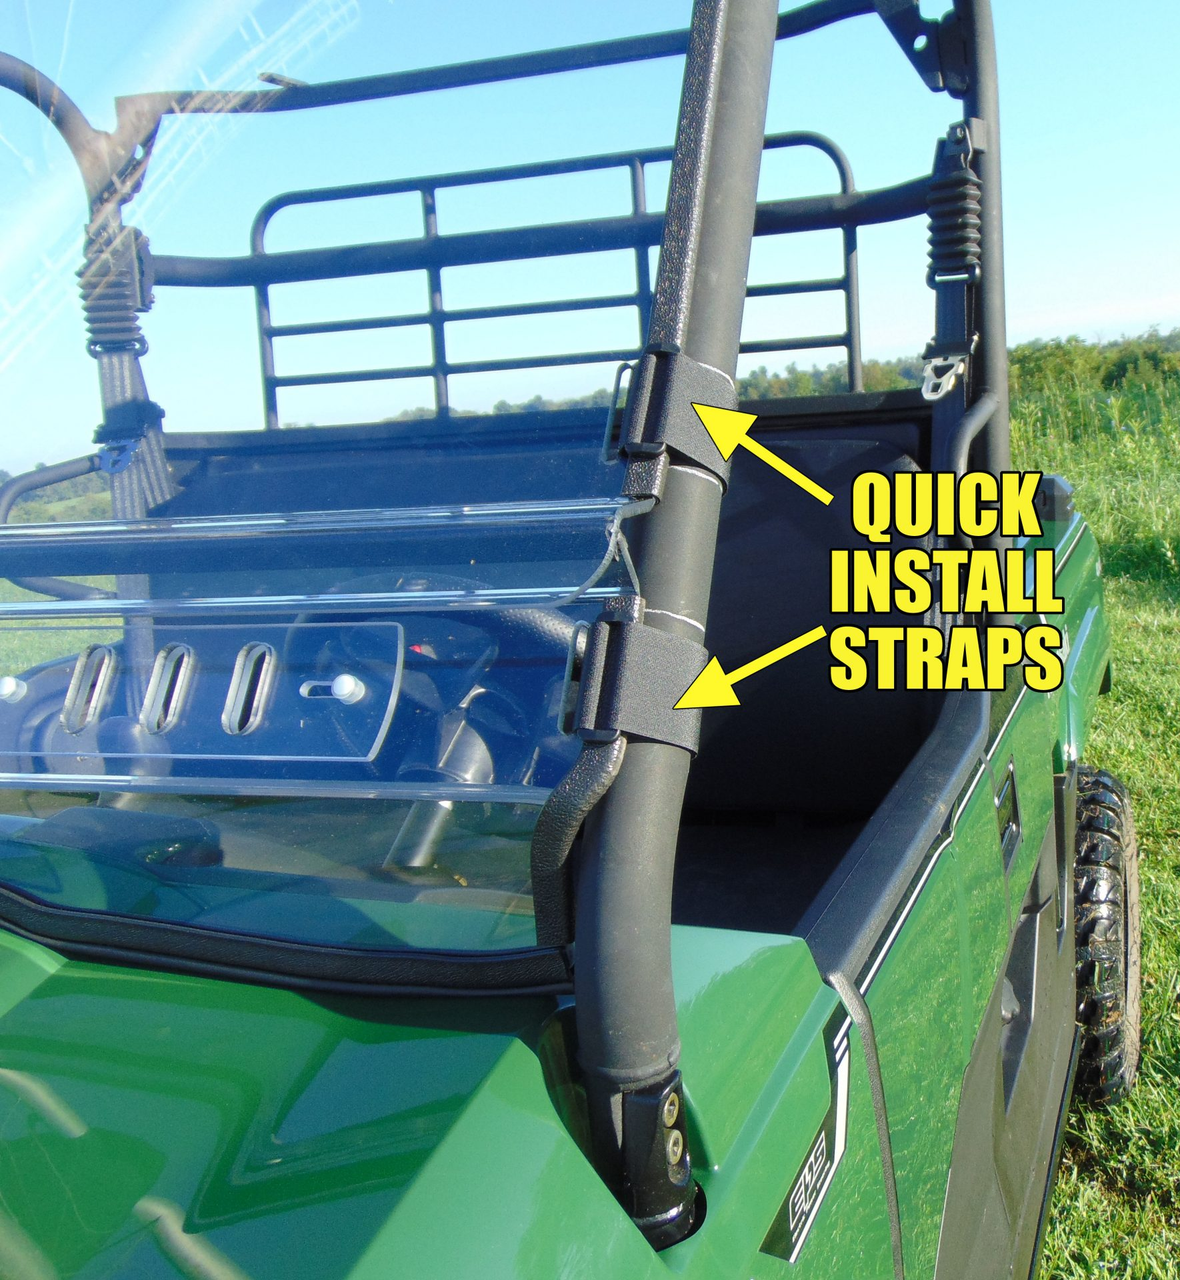 3 Star, side x side, side by side, sxs, utv, accessories, Arctic Cat, Textron, Prowler, 550, 700xt, 1000xt, two piece, windshield, polycarbonate, lexan, gp lexan, hard, coated, scratch resistant, scratch resistance, mr10, mar, gp lexan, vents, vented, vent, quick install straps